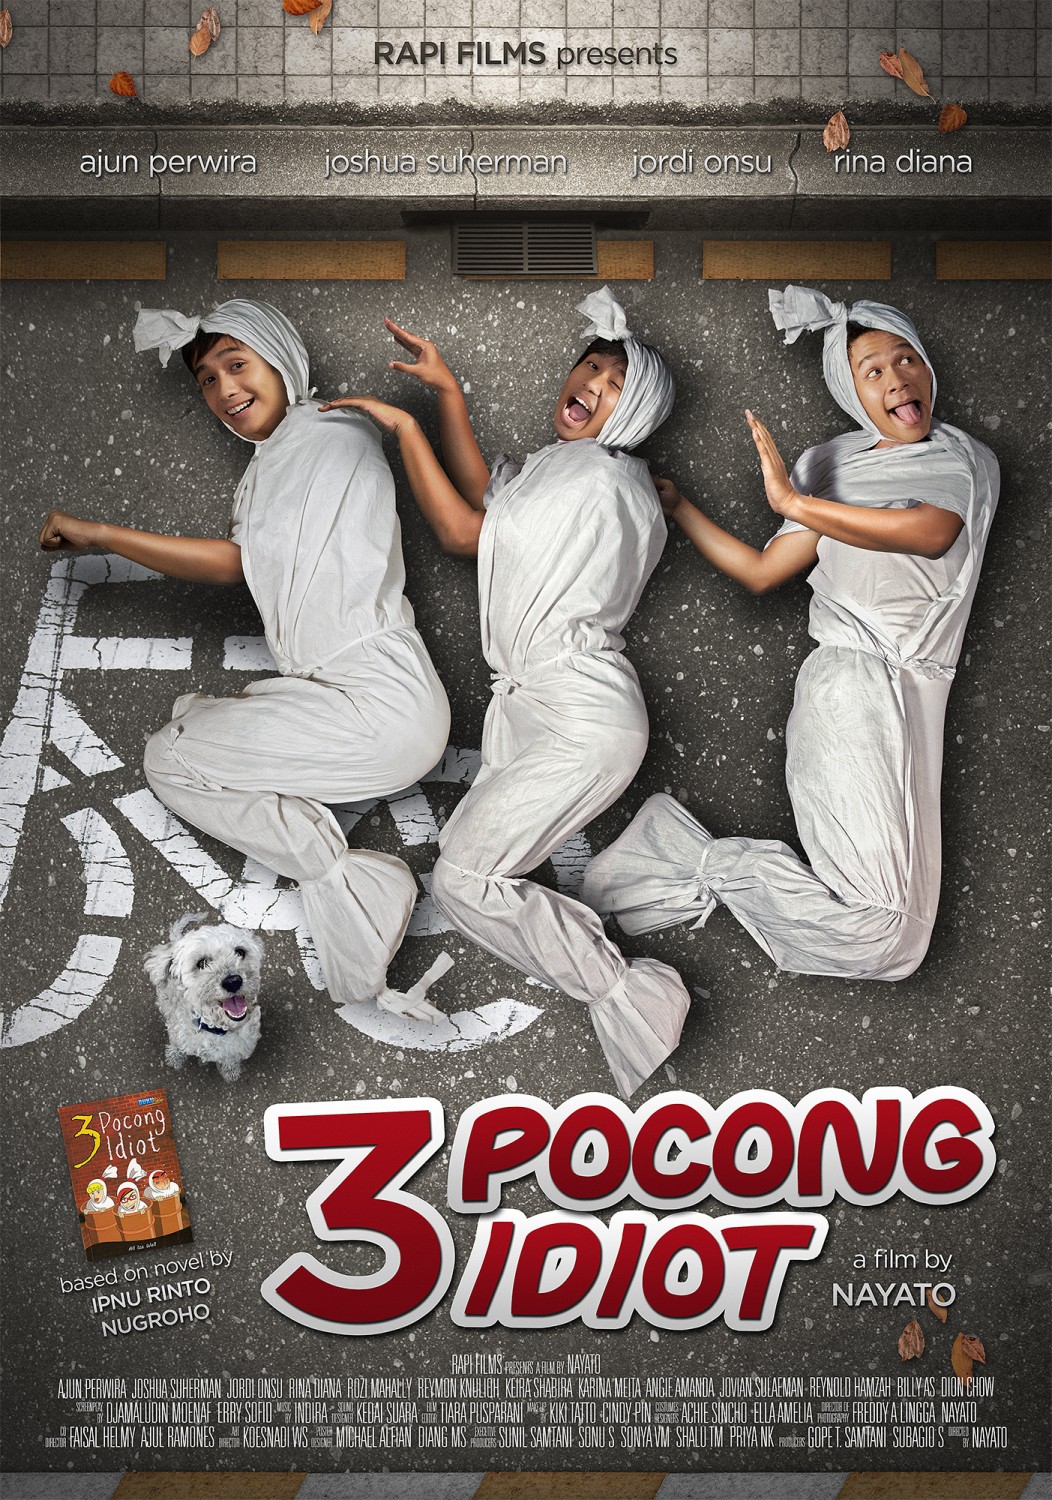 Extra Large Movie Poster Image for 3 pocong idiot (#1 of 2)